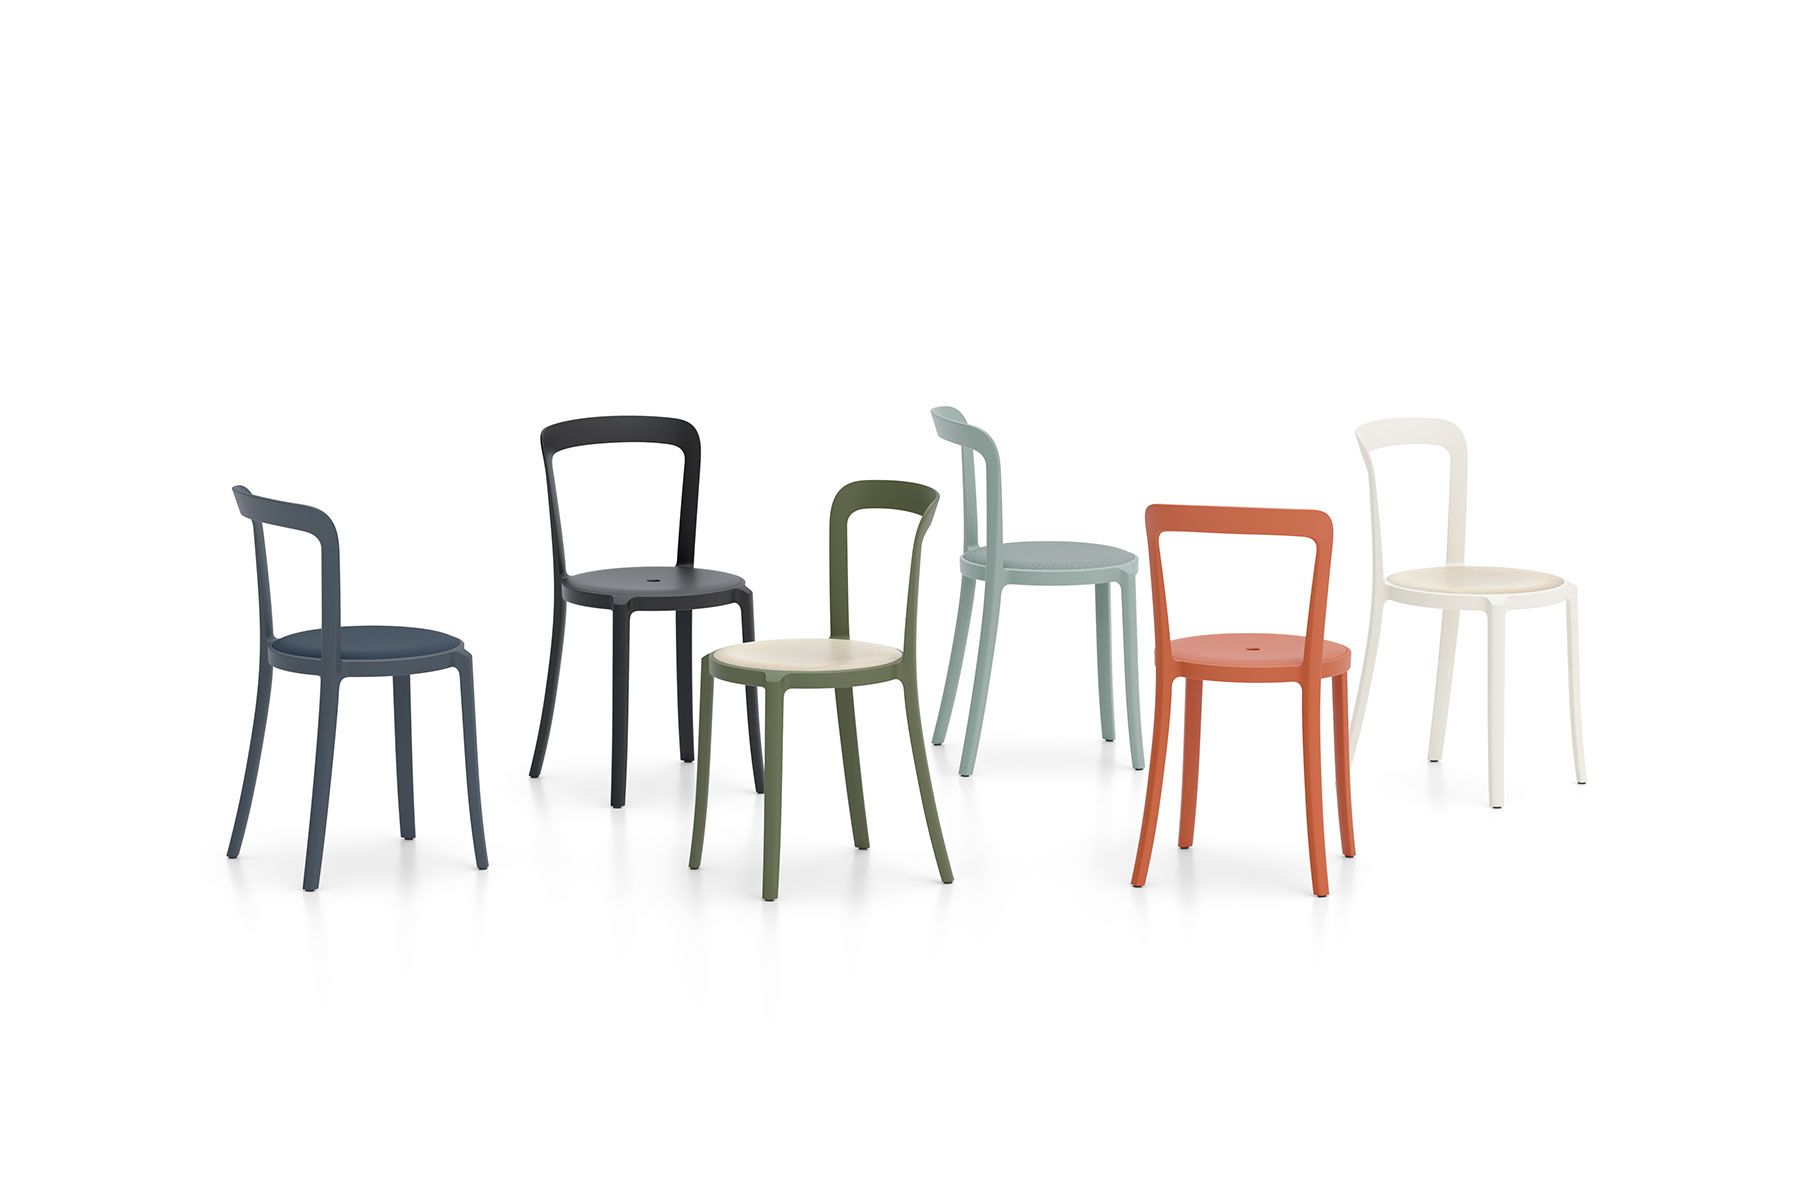 Emeco’s Latest Chair Is Virtually Indestructible – SURFACE